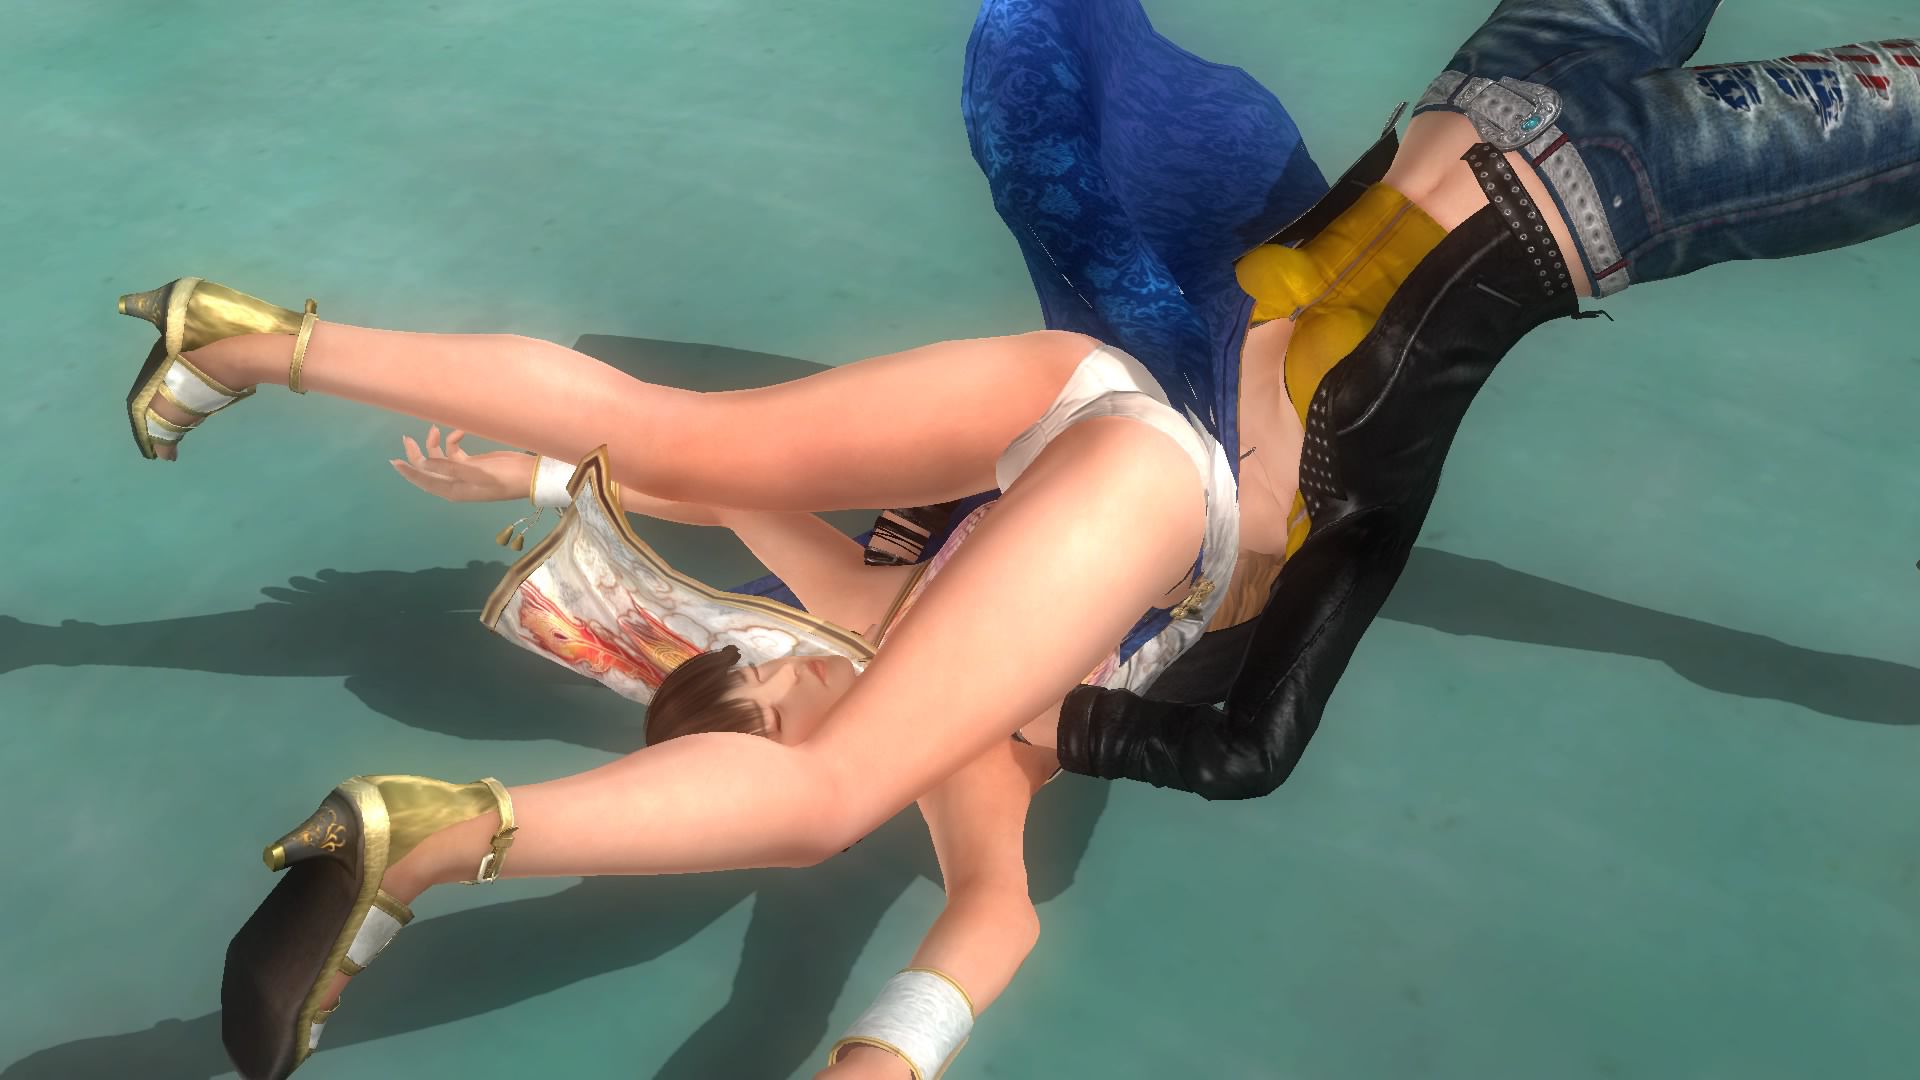 DOA5LR cheongsam delivery special! Elo slit not costume featured 3